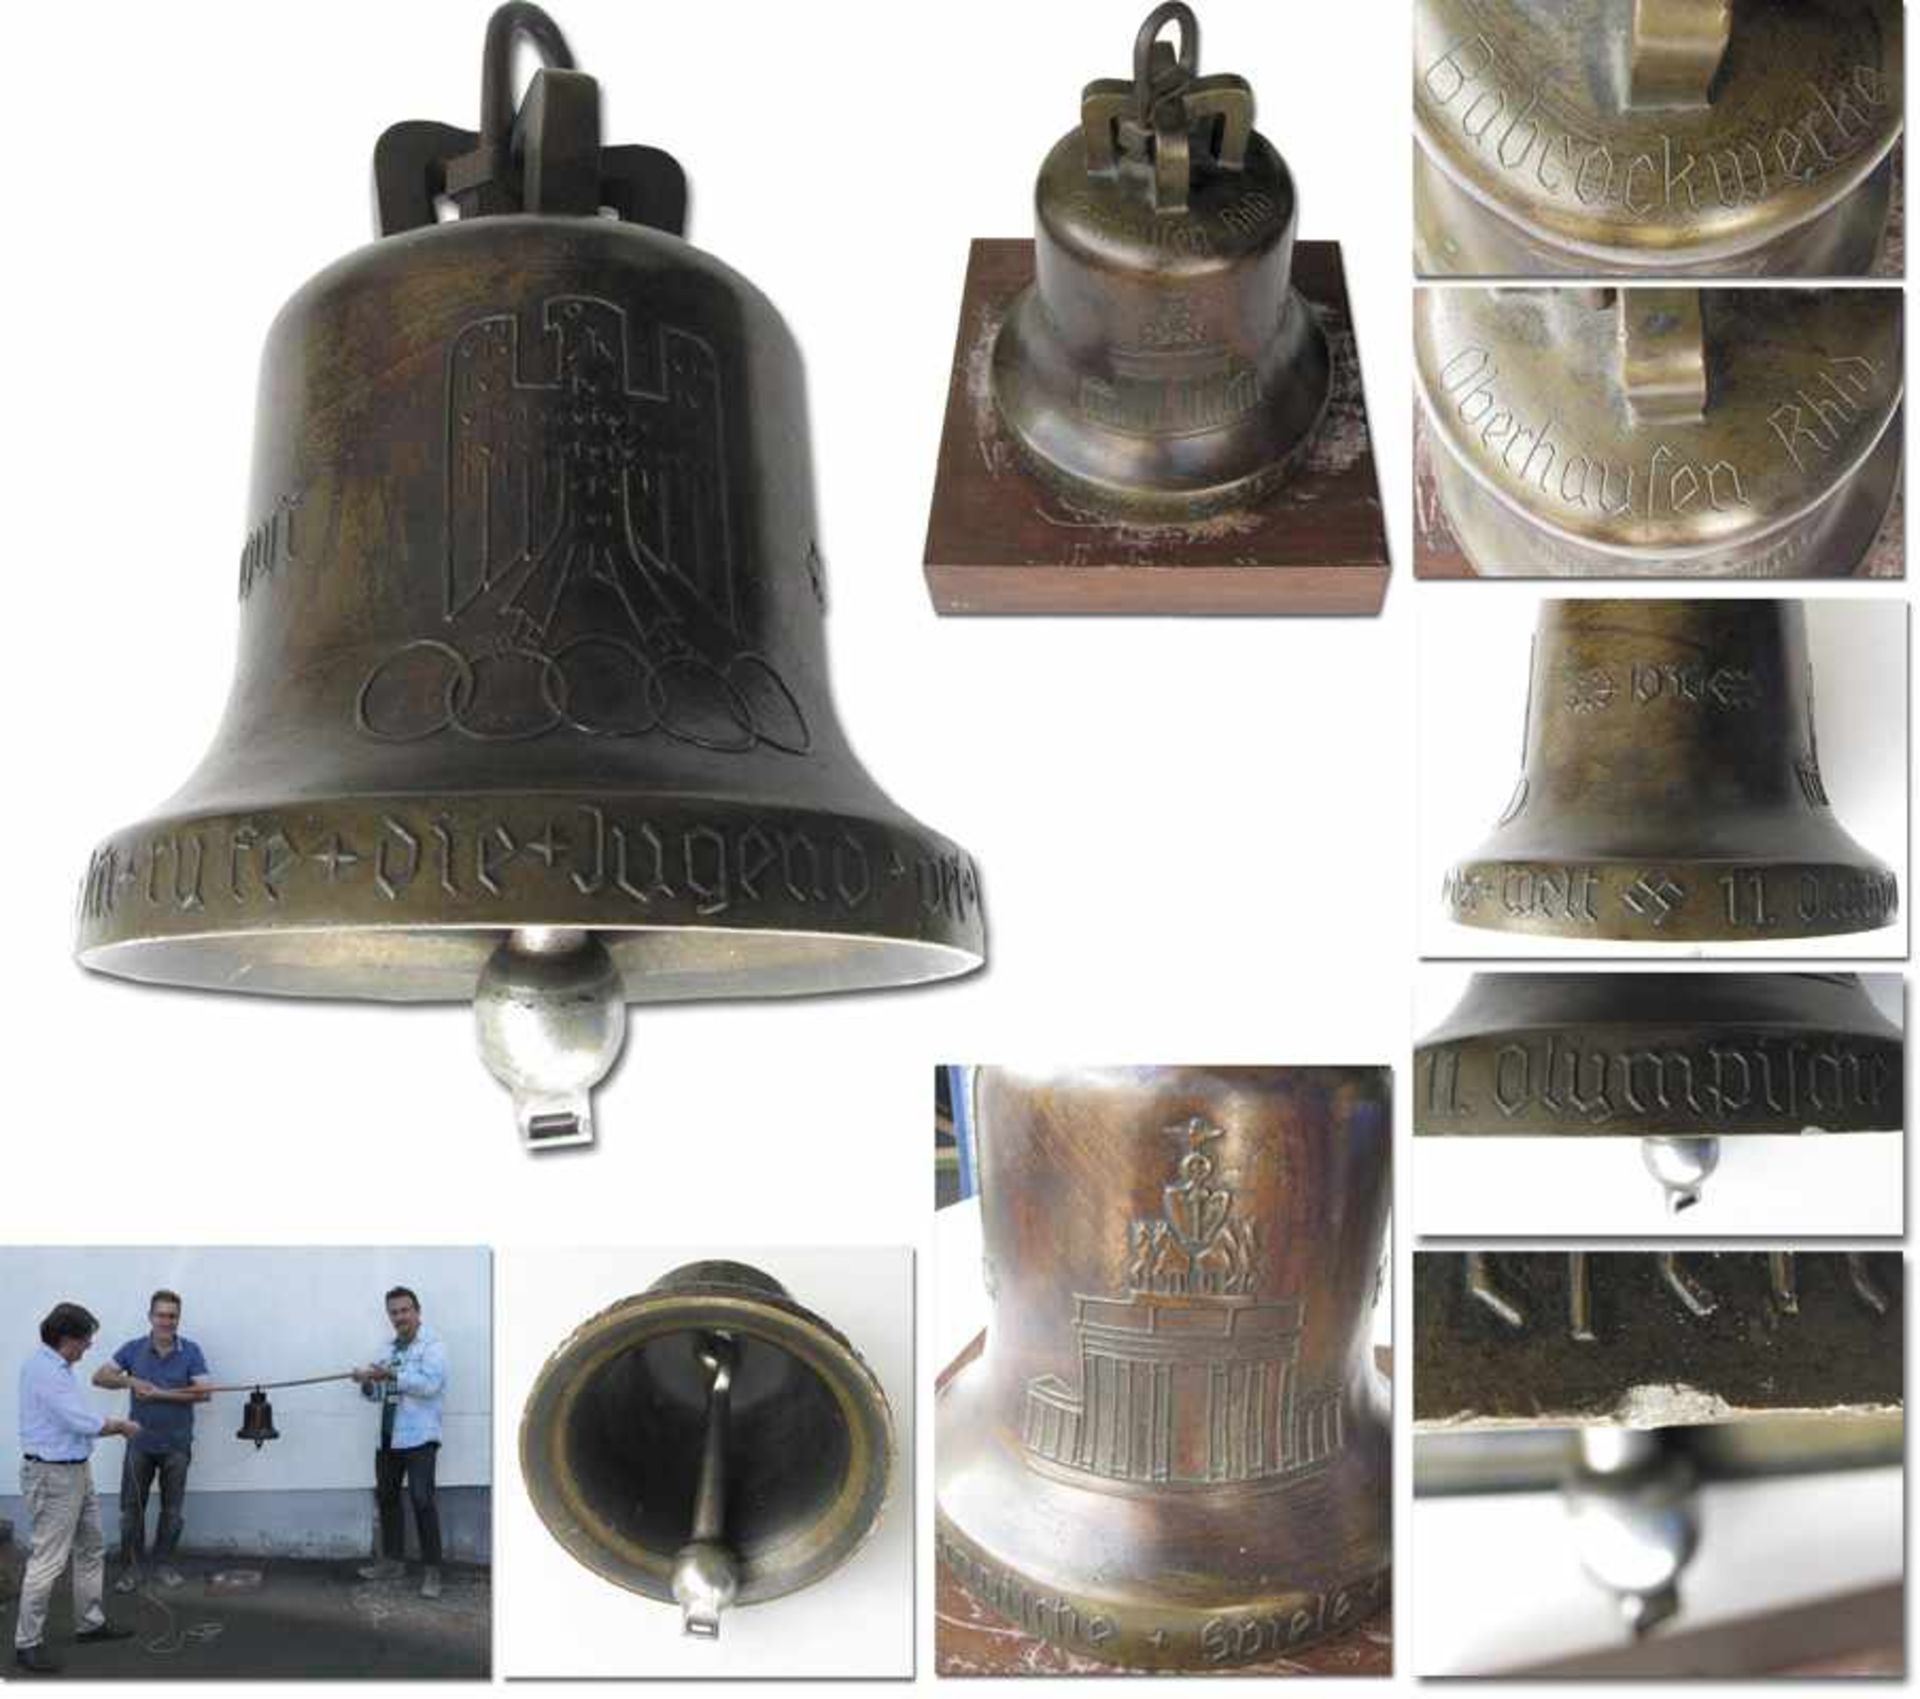 Replica of the olympic bell Berlin 1936 - Miniature model of the Olympic Bell of 1936. "Ich rufe die